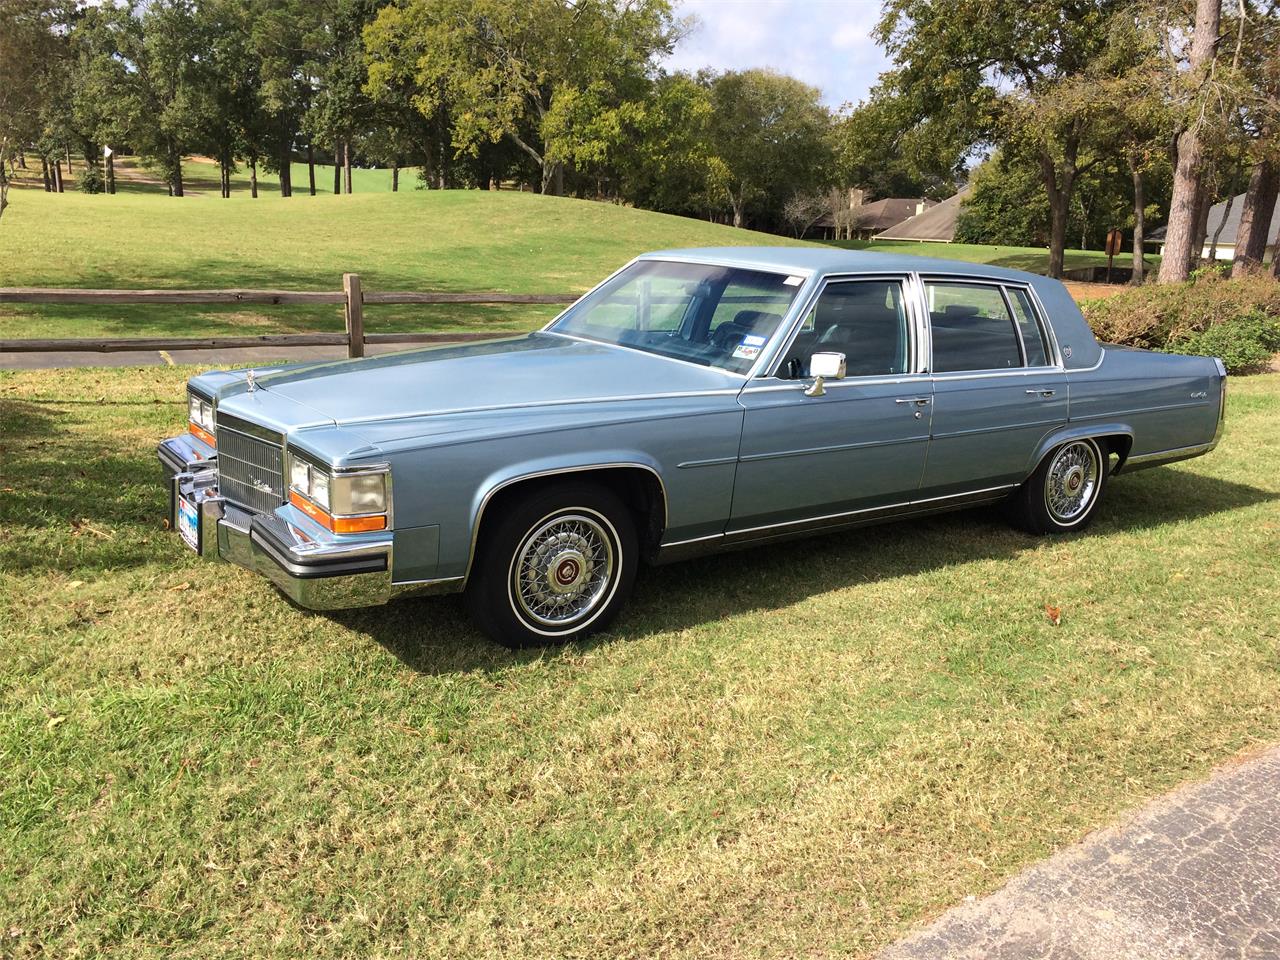 1986 Cadillac Fleetwood Brougham For Sale Classiccars Com